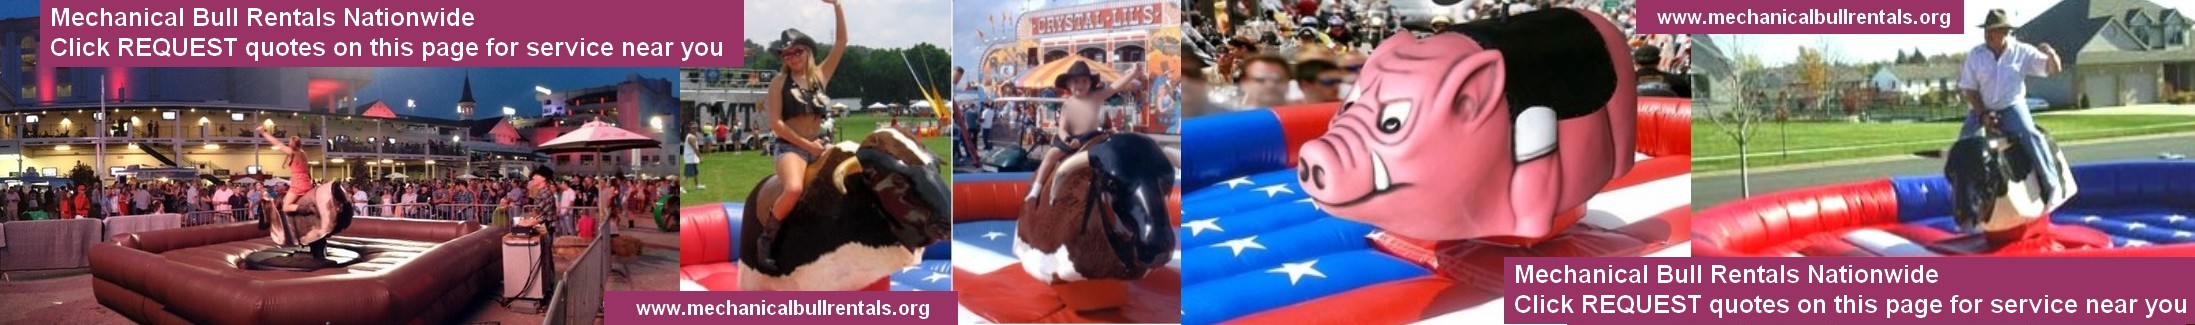 Mechanical Bull Rentals Atlantic City New Jersey NJ and near you. Free referrals to local mechanical bull companies LOGO